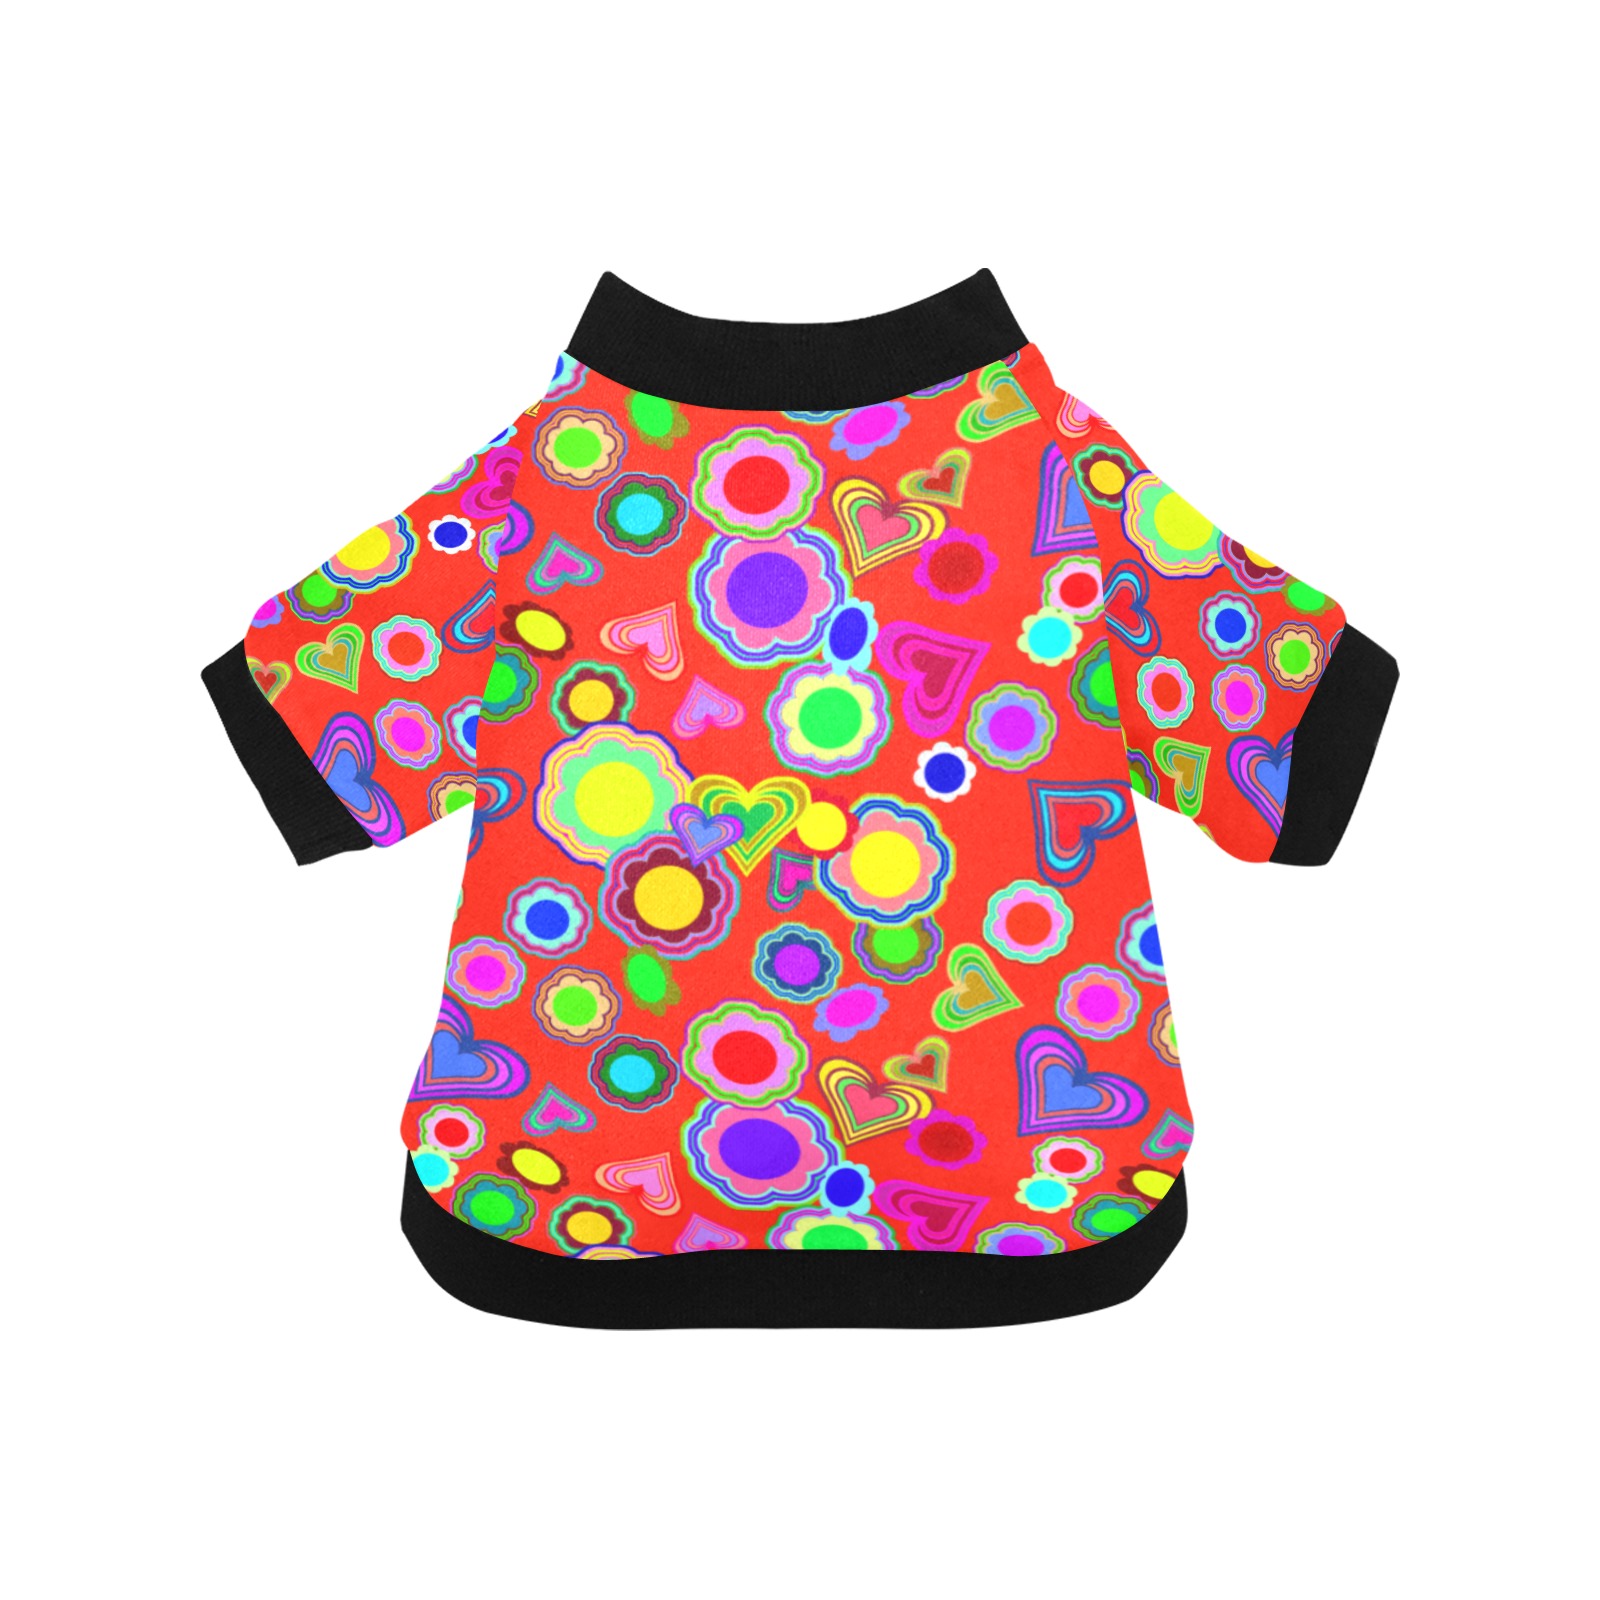 Groovy Hearts and Flowers Red Pet Dog Round Neck Shirt